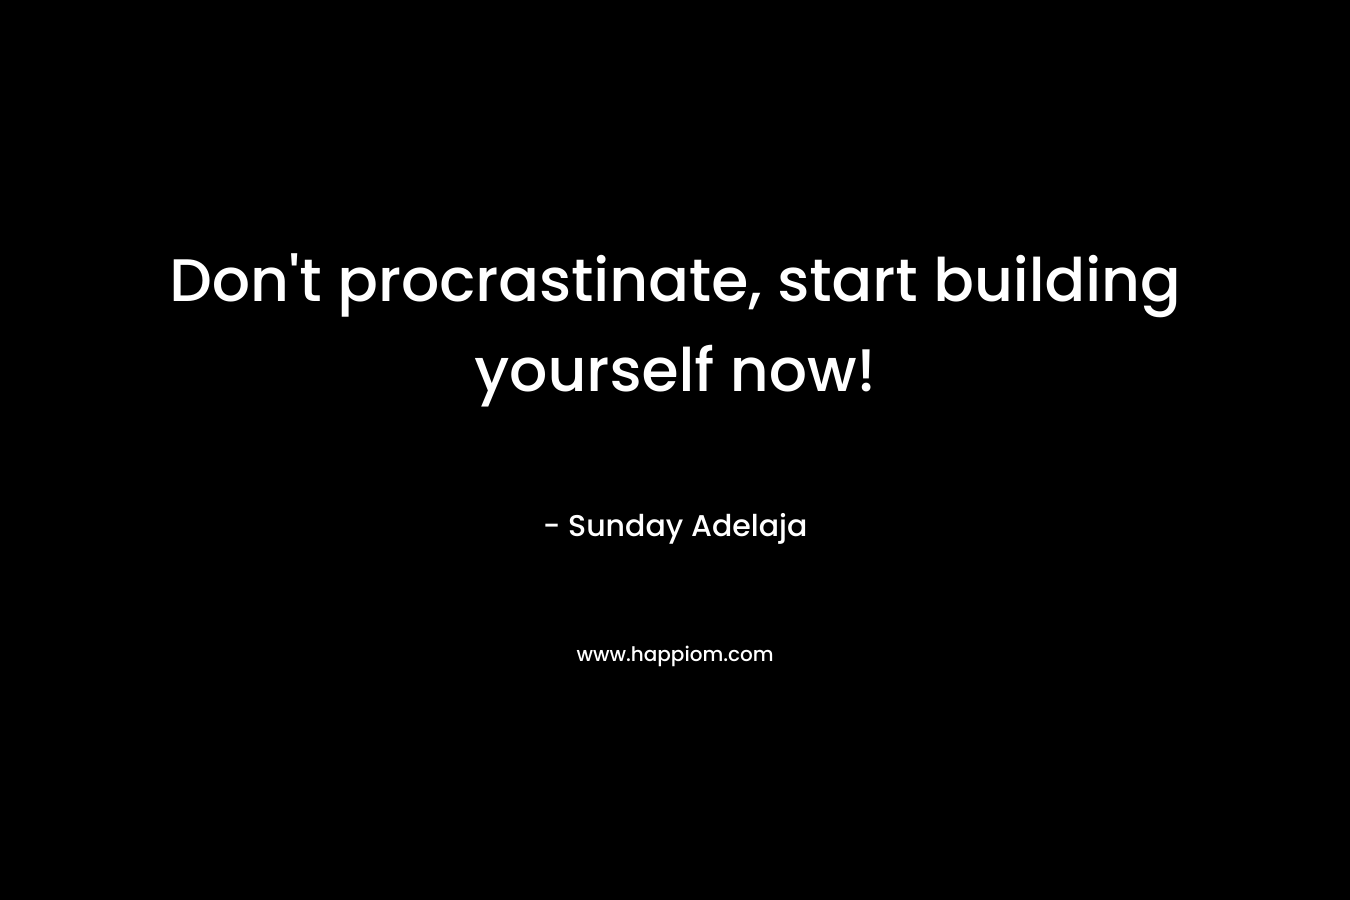 Don't procrastinate, start building yourself now!